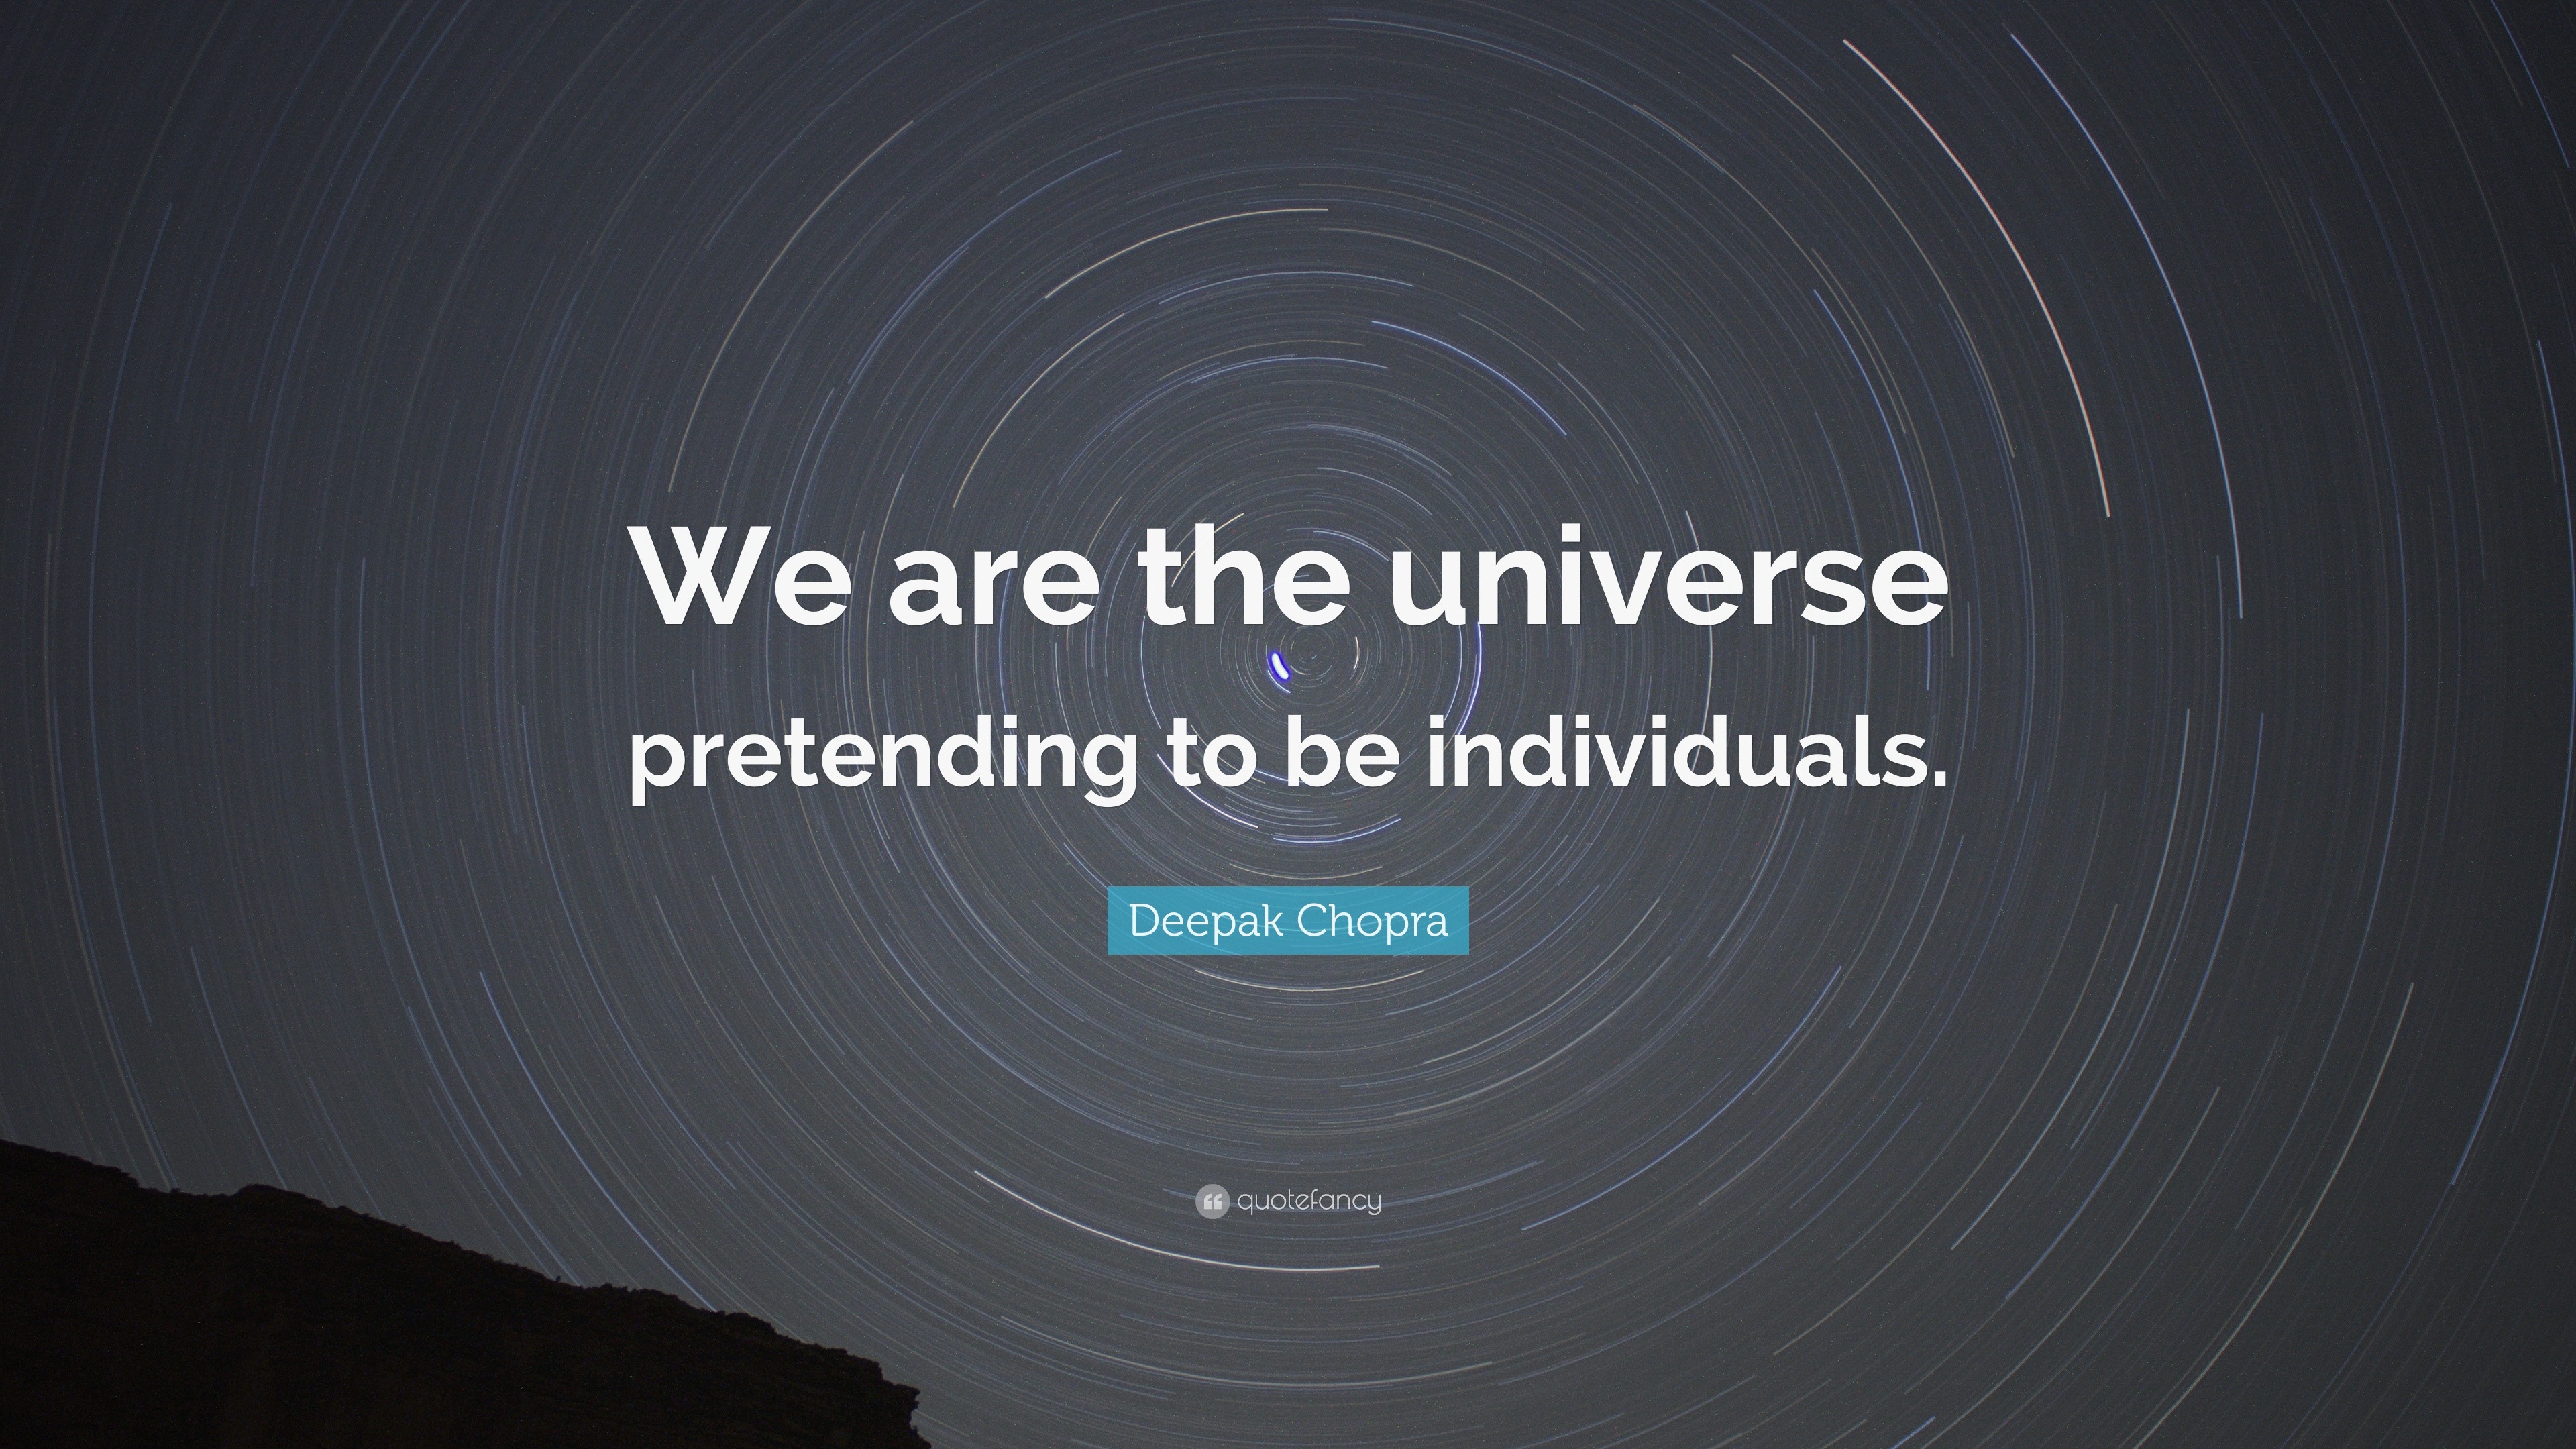 Deepak Chopra Quote: “We are the universe pretending to be individuals.”